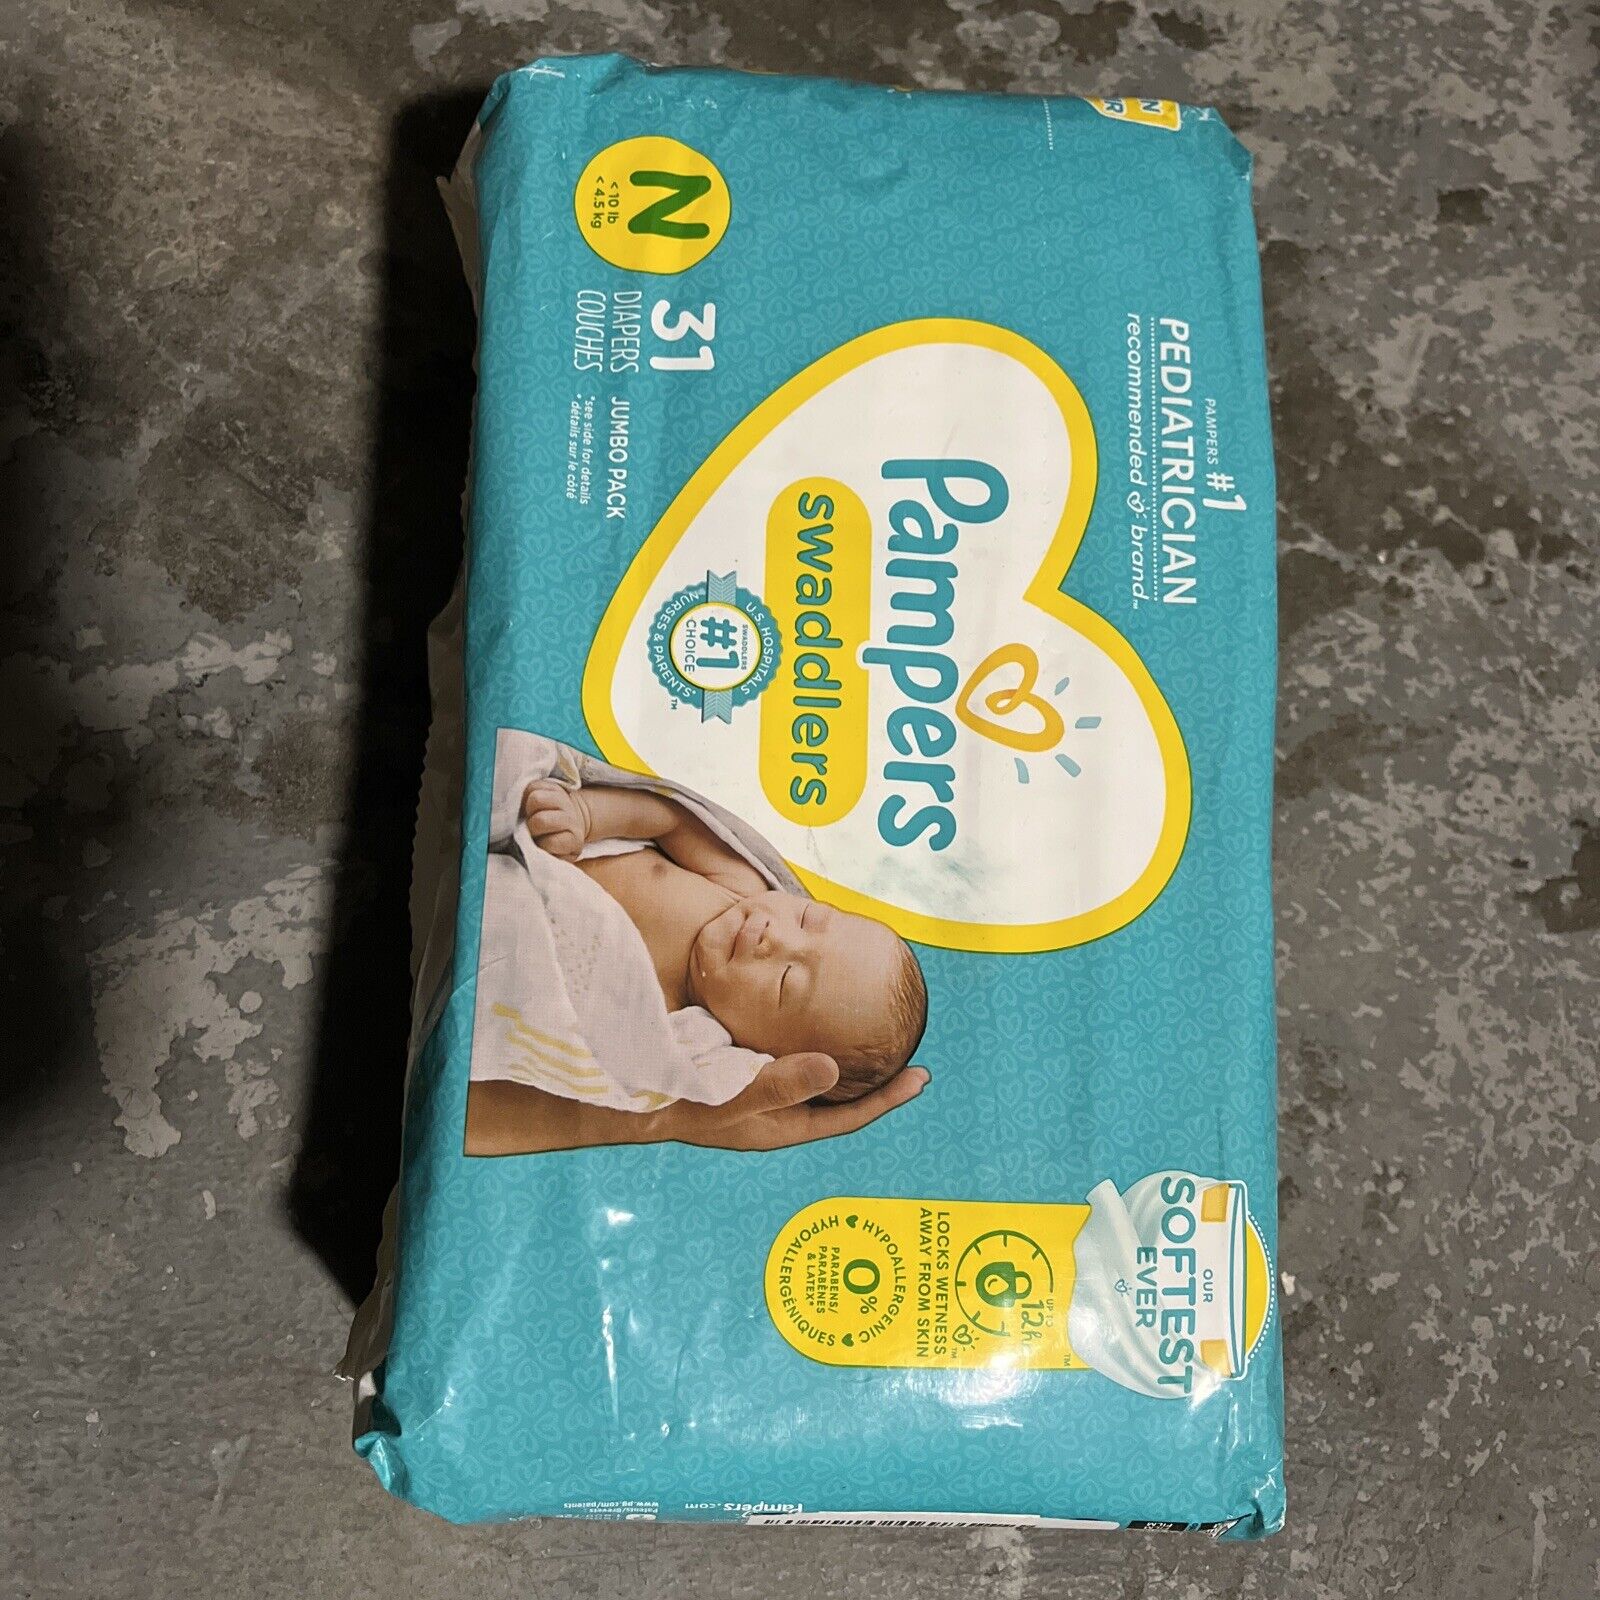 Pampers Swaddlers Diapers Size 7, 70 count - Disposable Diapers